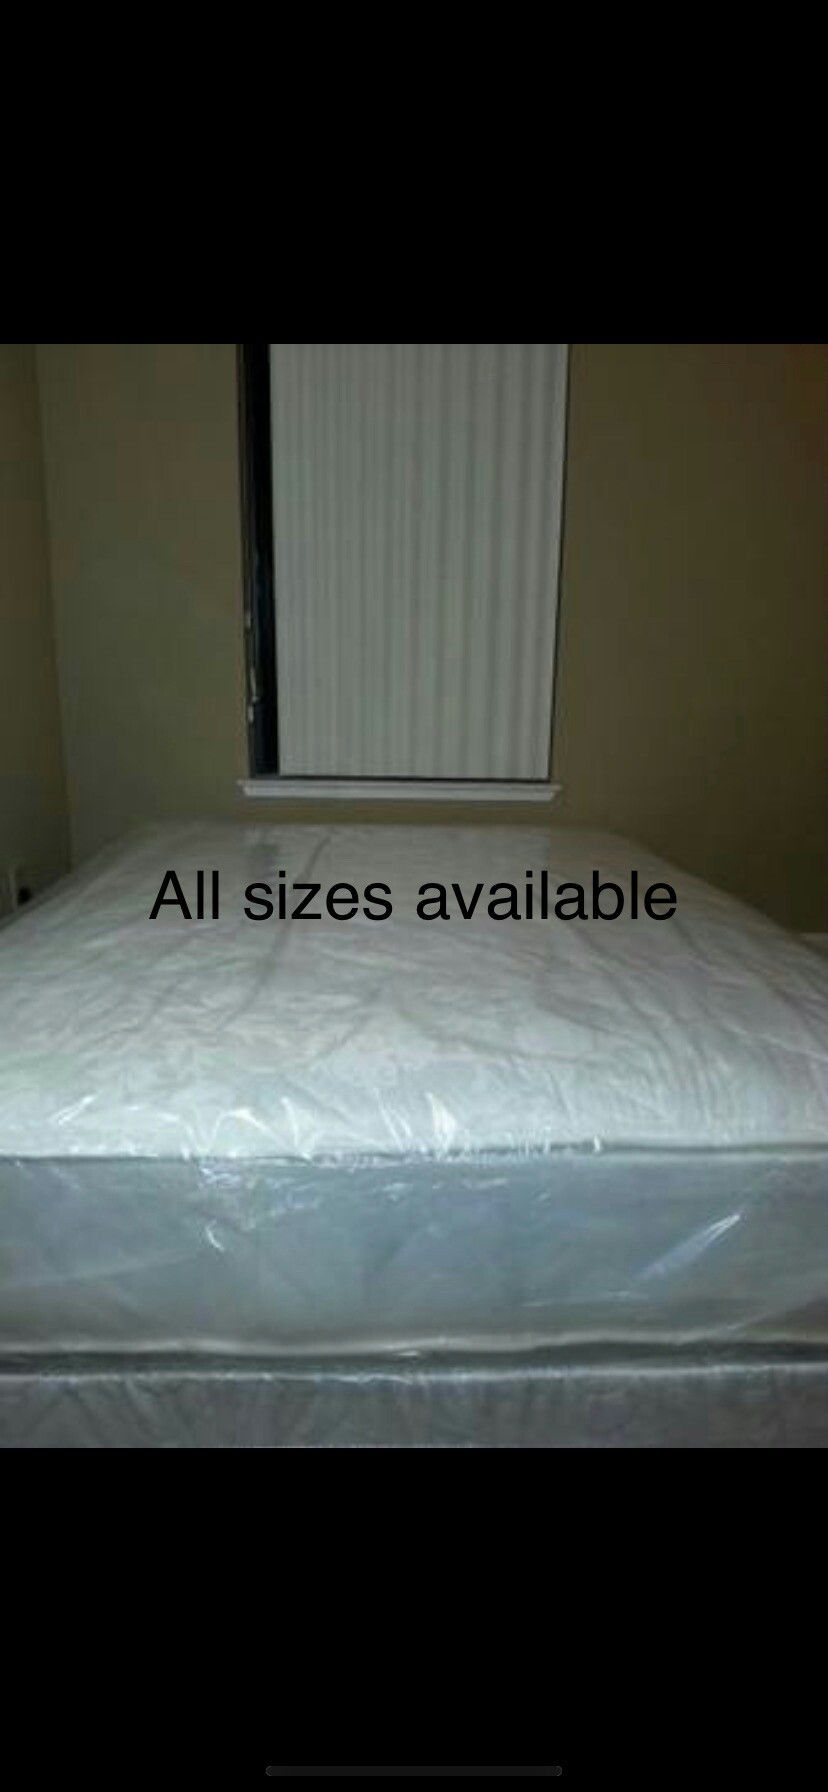 New queen size mattress and box spring available. Delivery is available